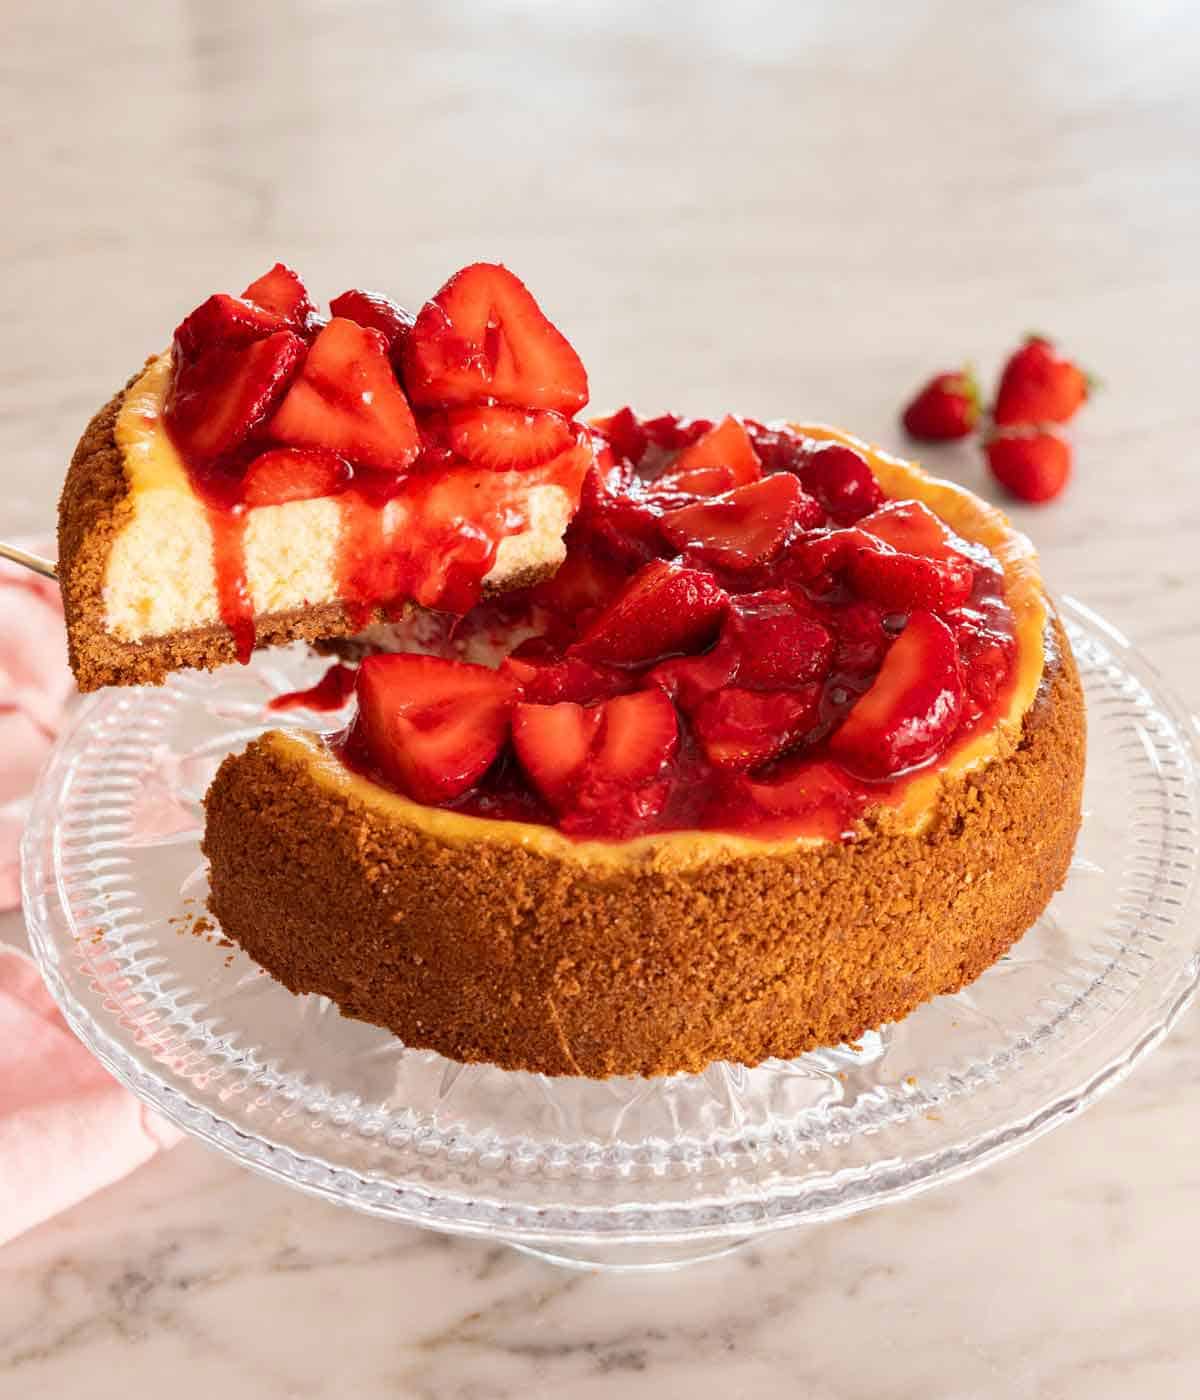 A slice of strawberry cheesecake being lifted from the rest of the cheesecake on a cake stand.